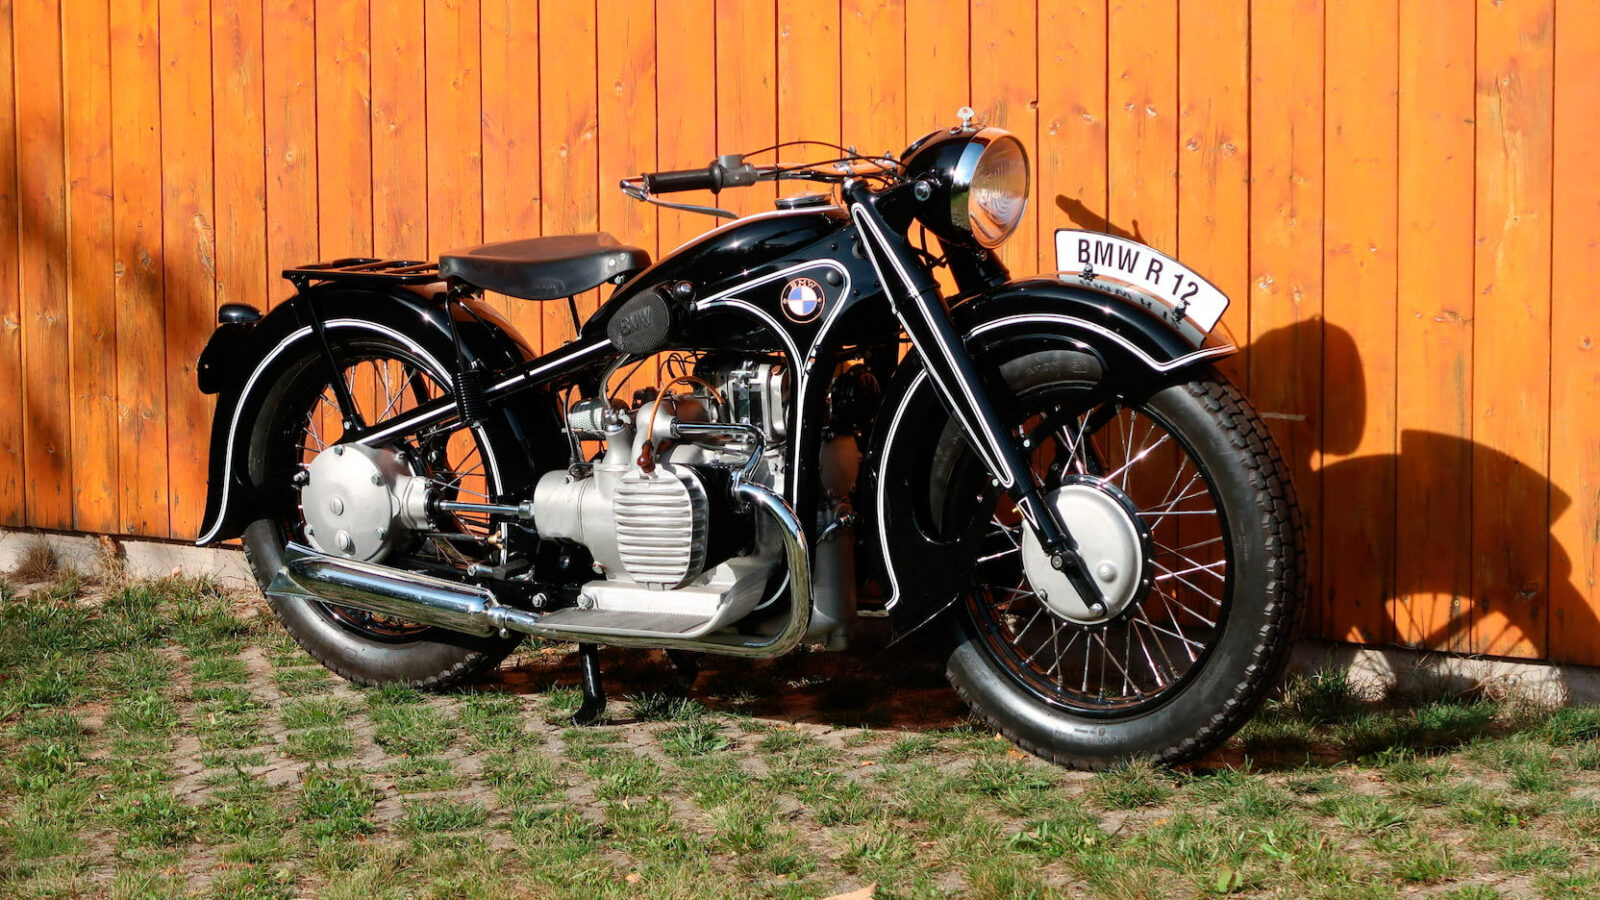 Motorcycle Design Icon: A Pre-WWII BMW R12